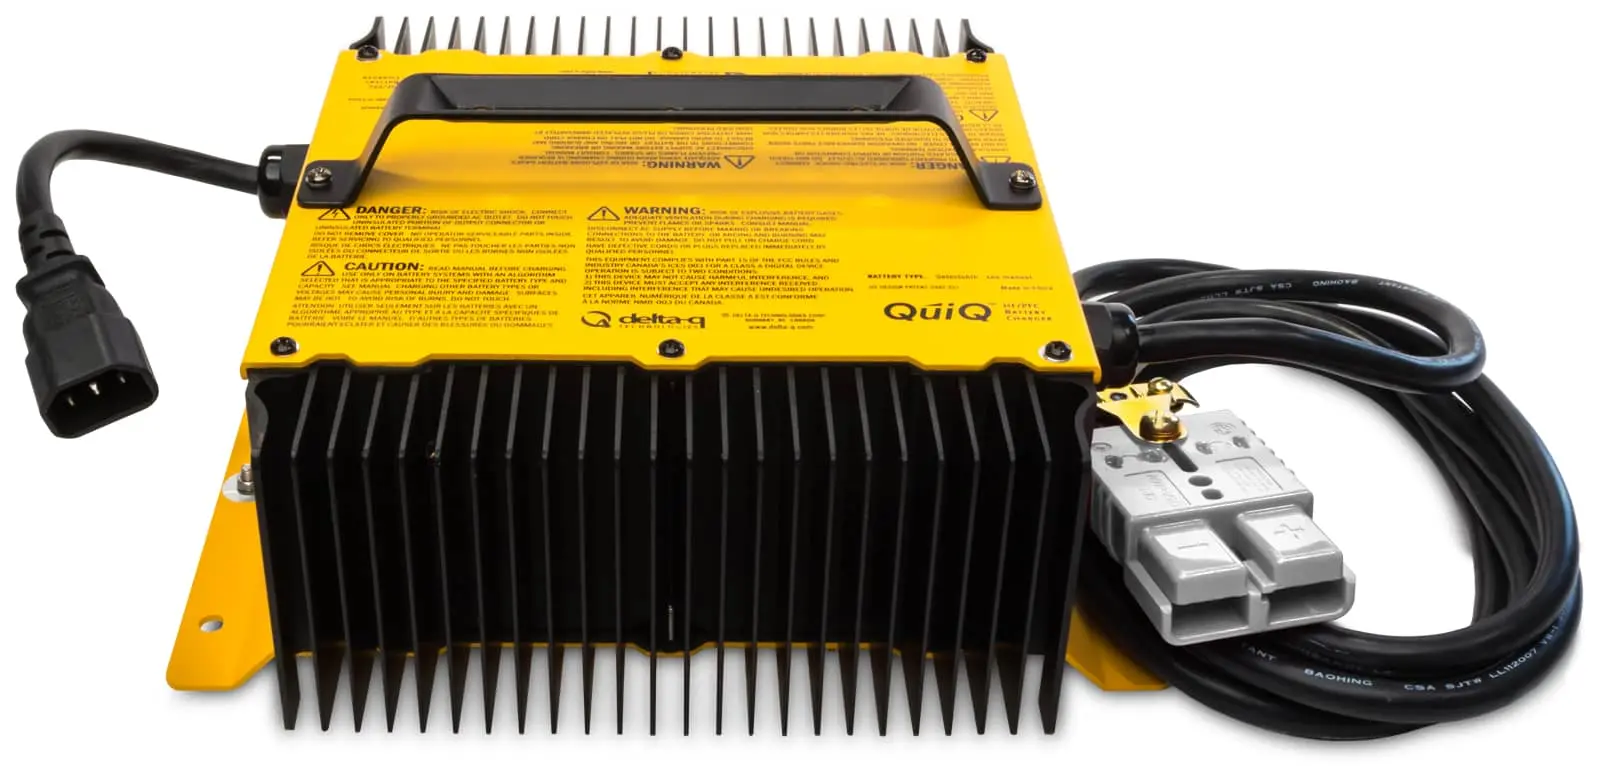 A yellow power inverter on a white background.